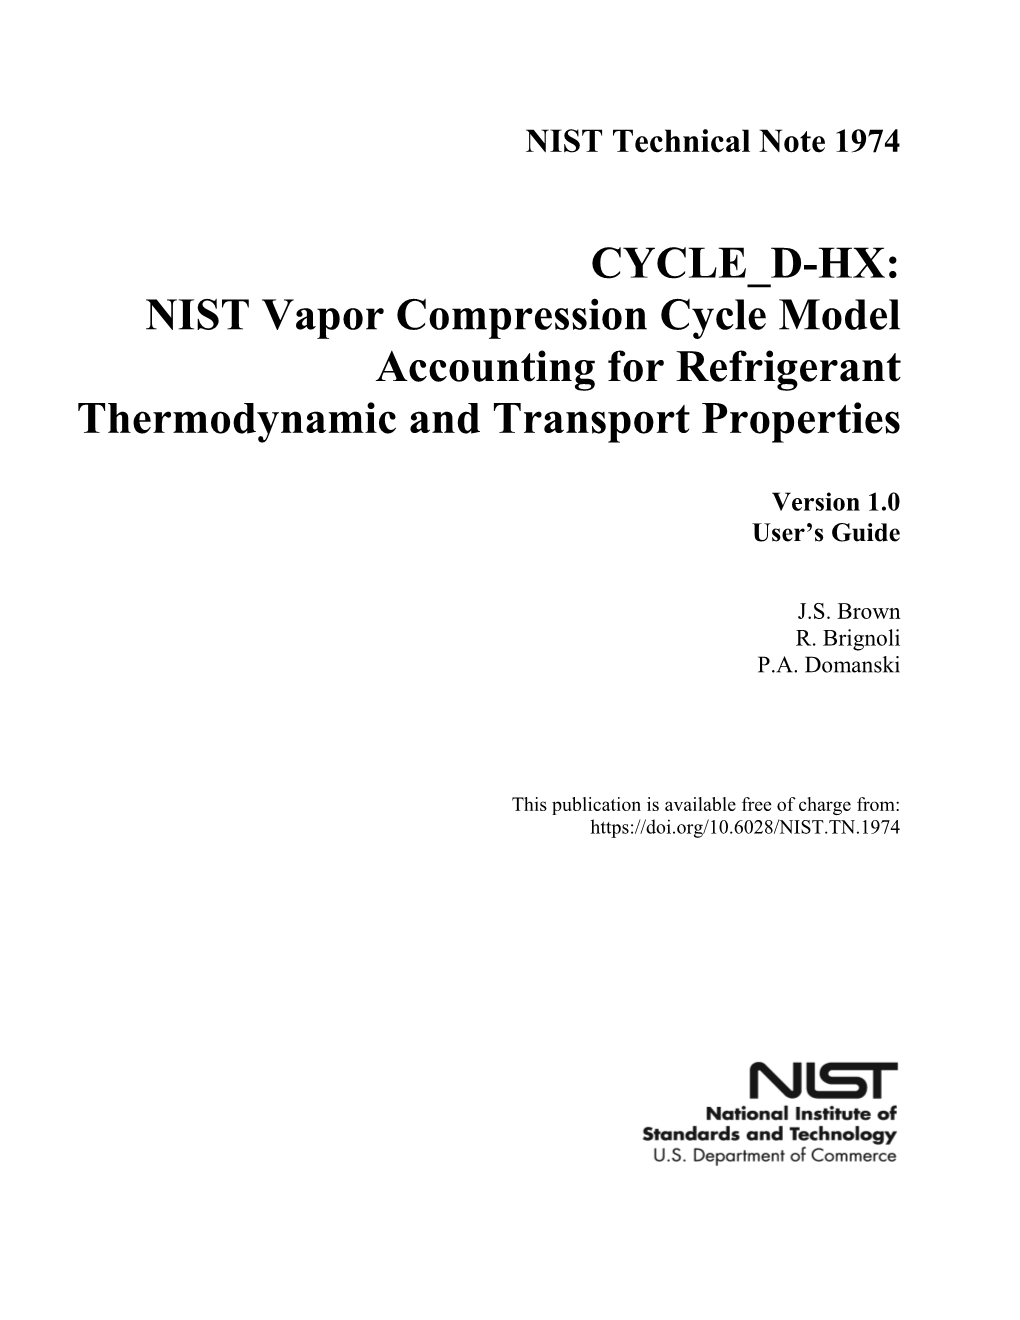 CYCLE D-HX: NIST Vapor Compression Cycle Model Accounting for Refrigerant Thermodynamic and Transport Properties